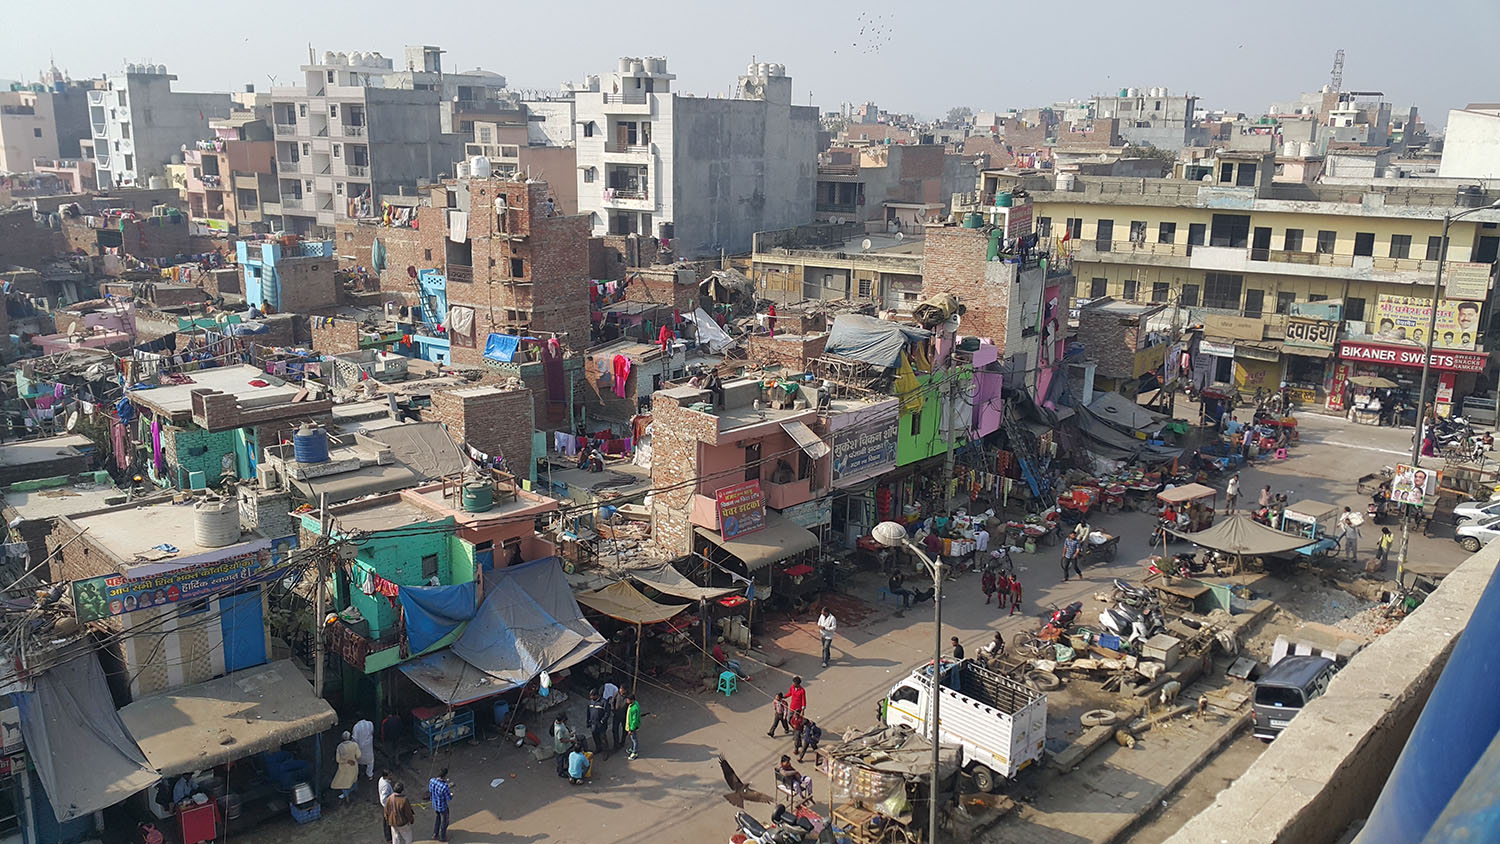 Slums, or informal settlements like these in Delhi, India, often lacking adequate access to essential services like connection lines to sewage systems. Shruti Syal